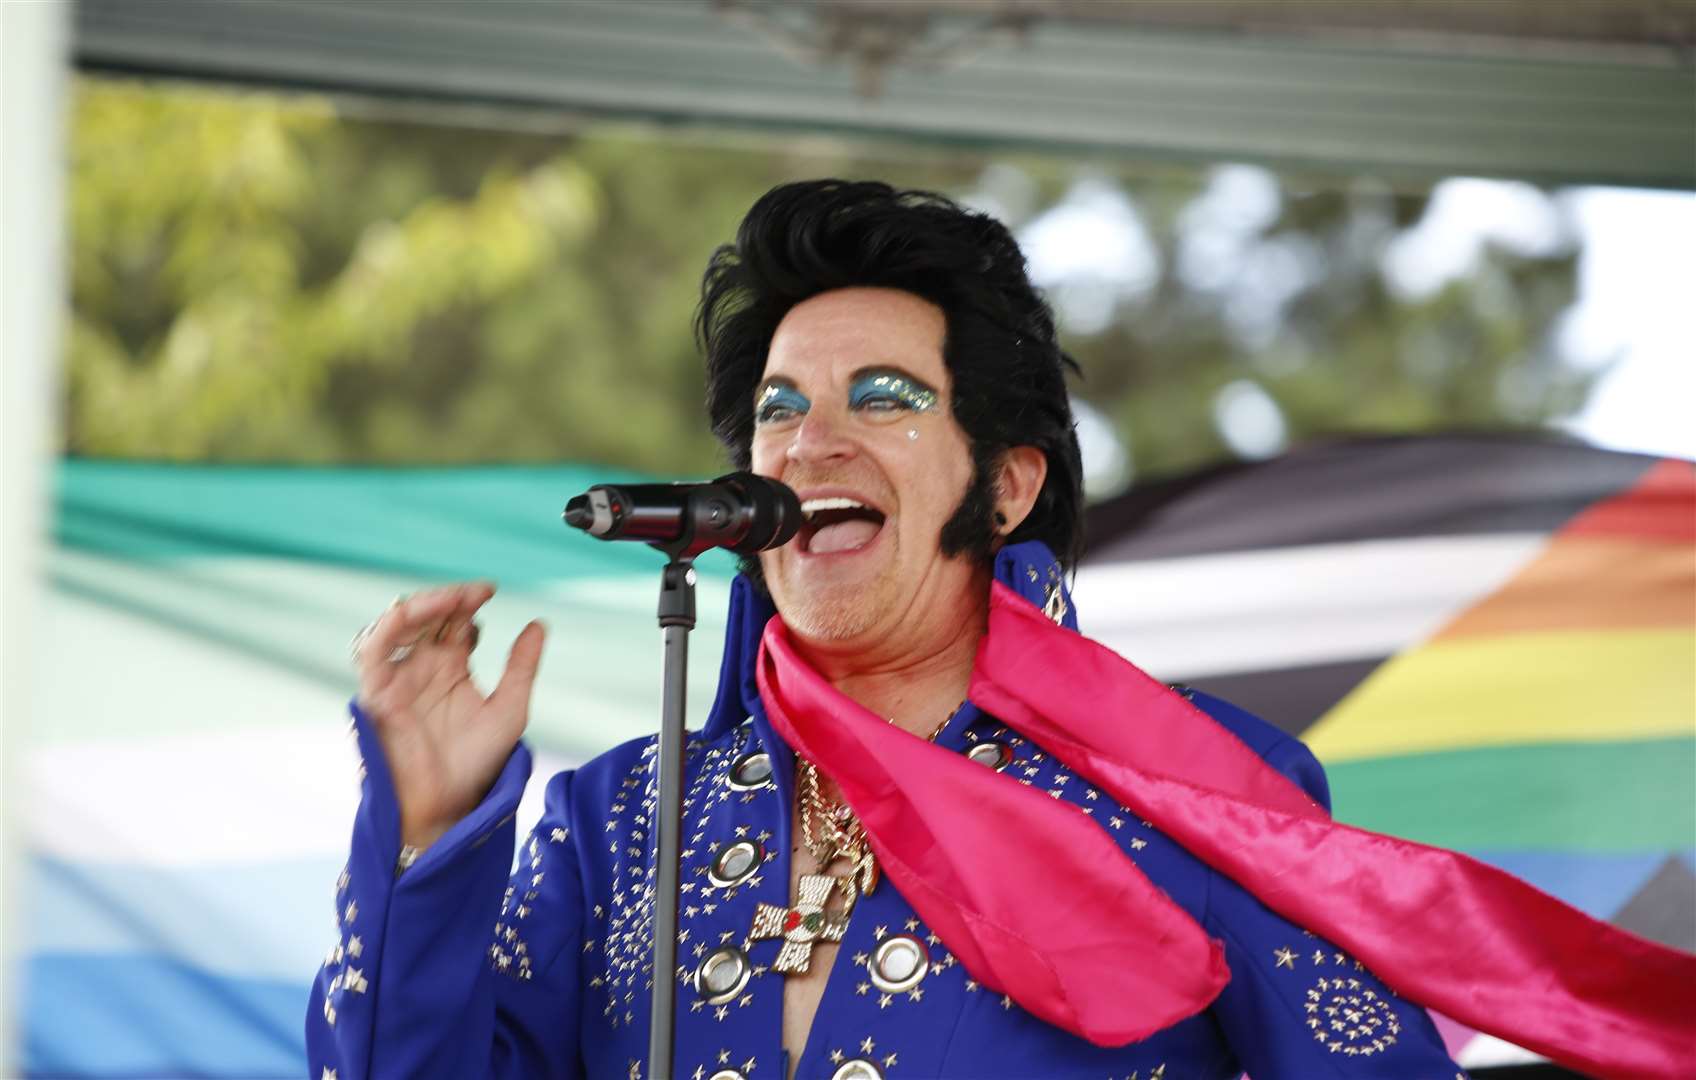 Elberace, also known as ‘Gay Elvis’, performed at Gravesham Pride last year. Picture: Ben Archell